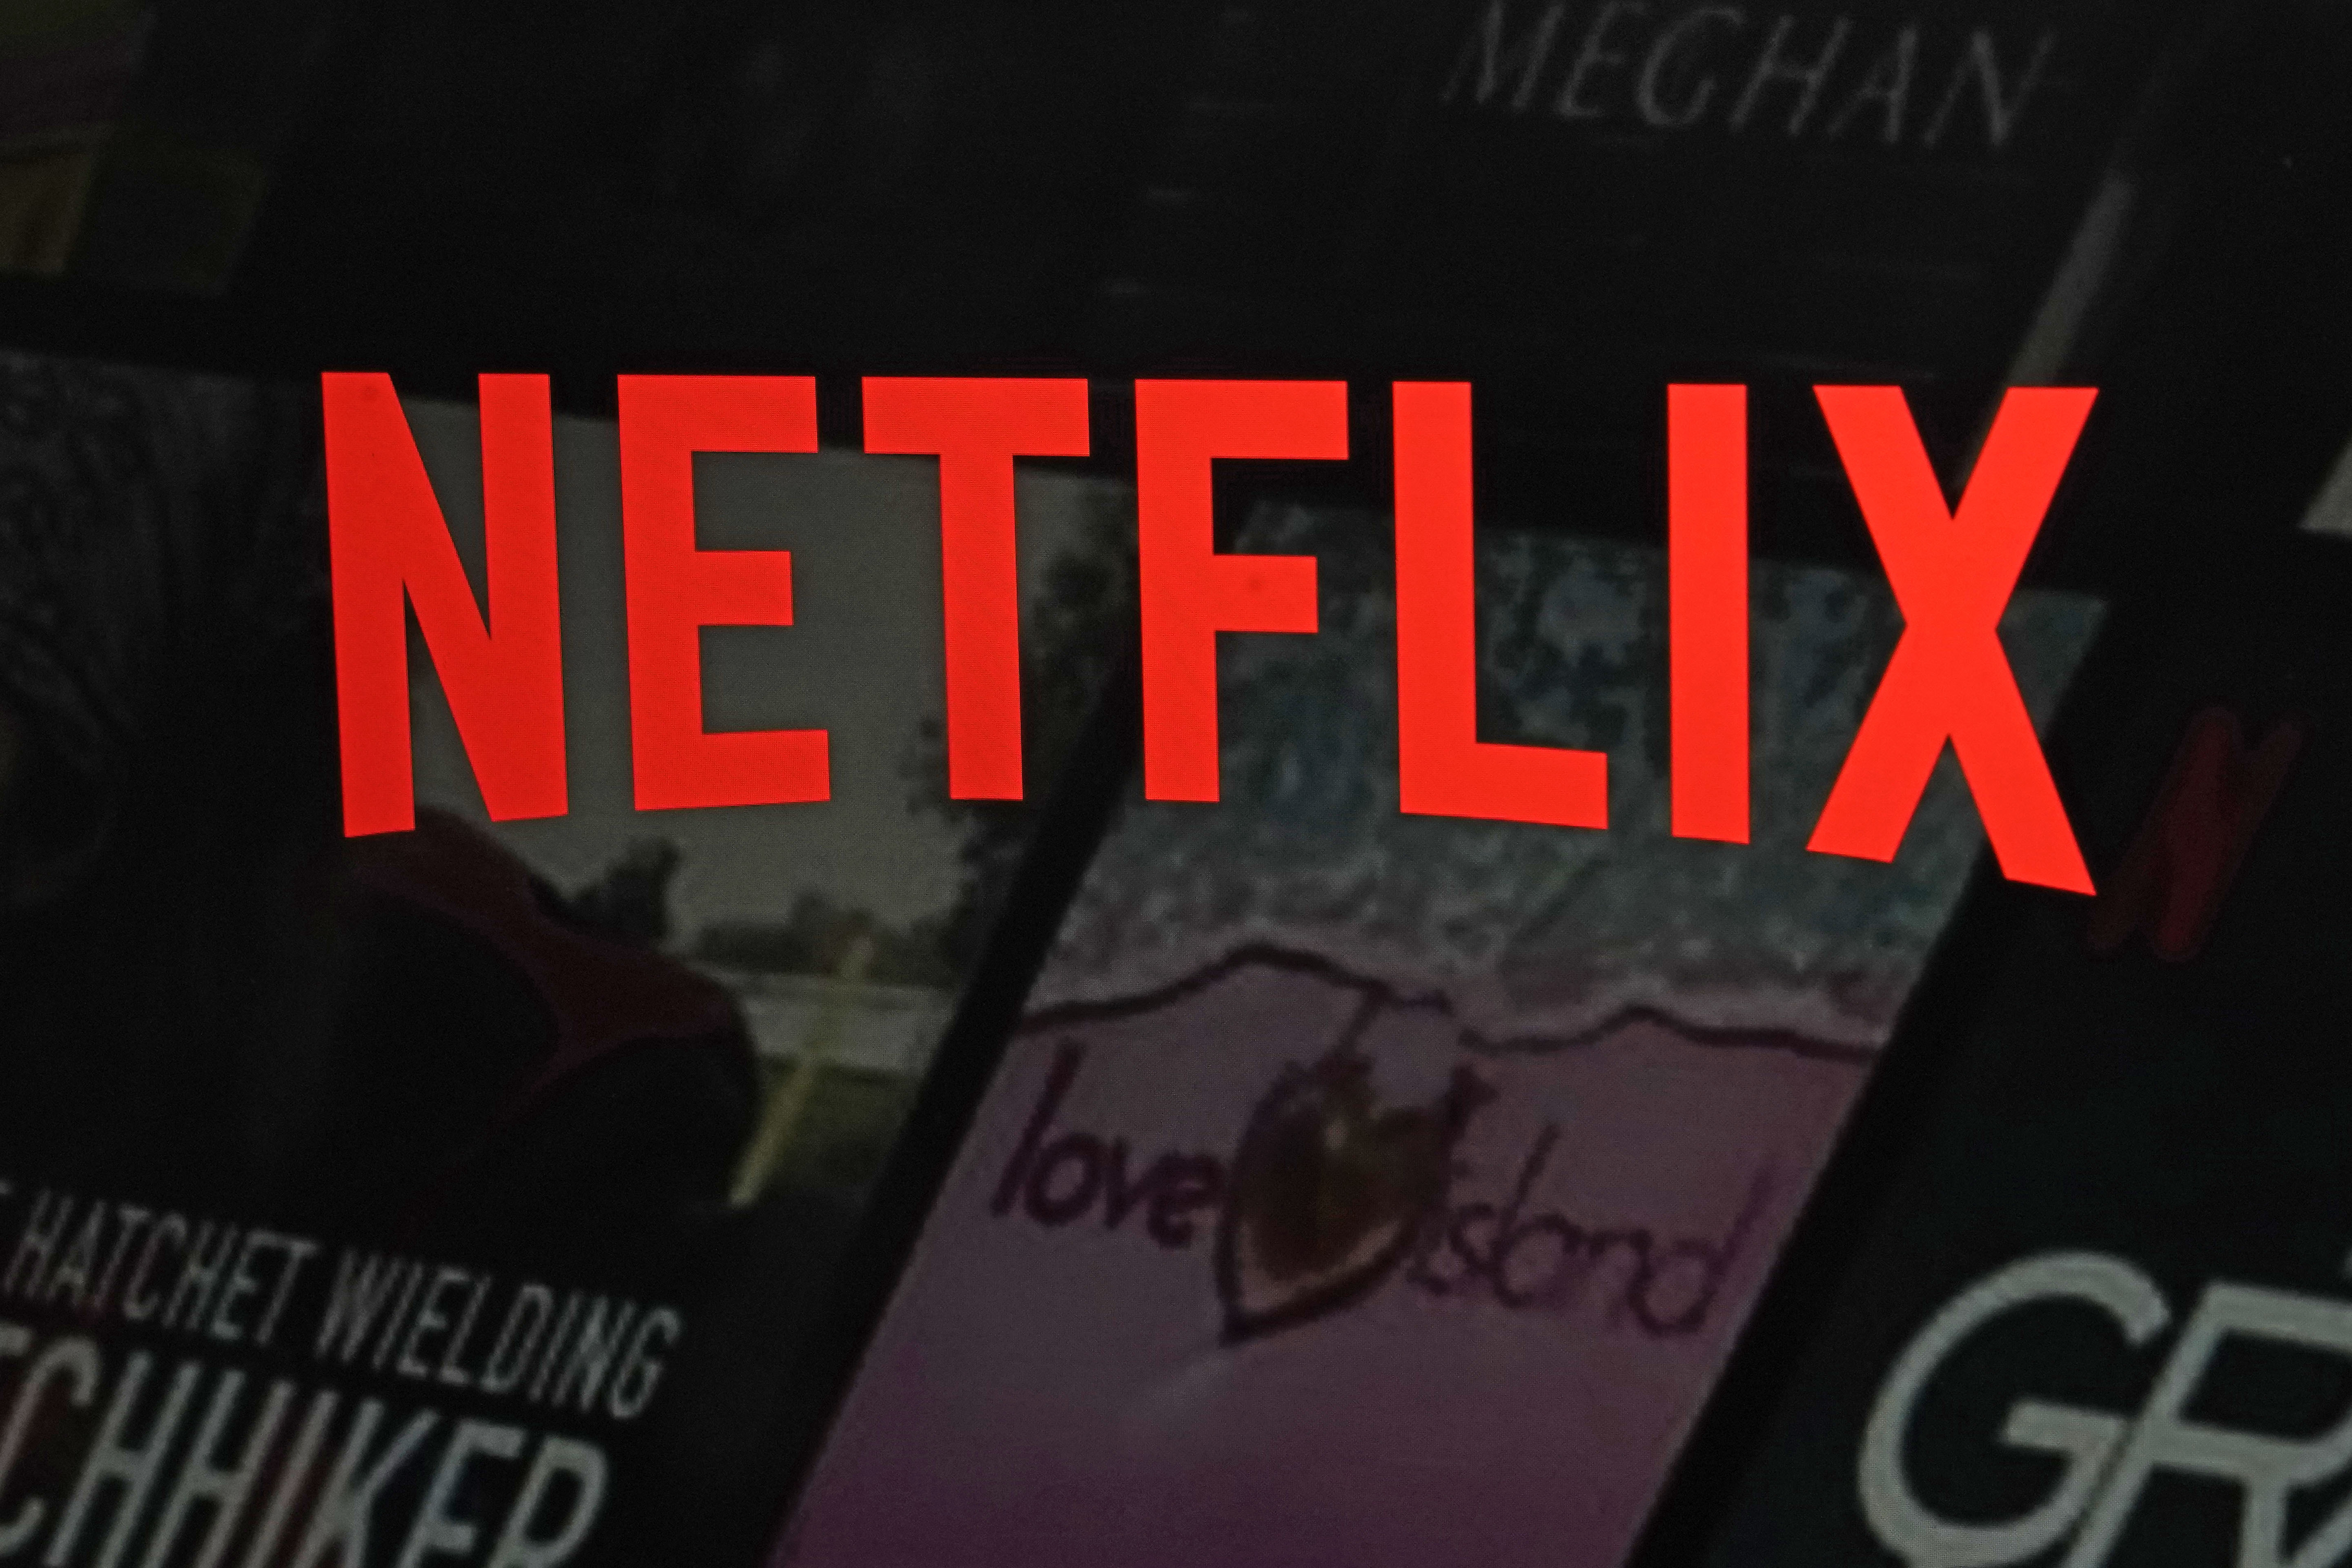 Netflix Stock Falls After Q2 Earnings Beat on Paid-Sharing Crackdown